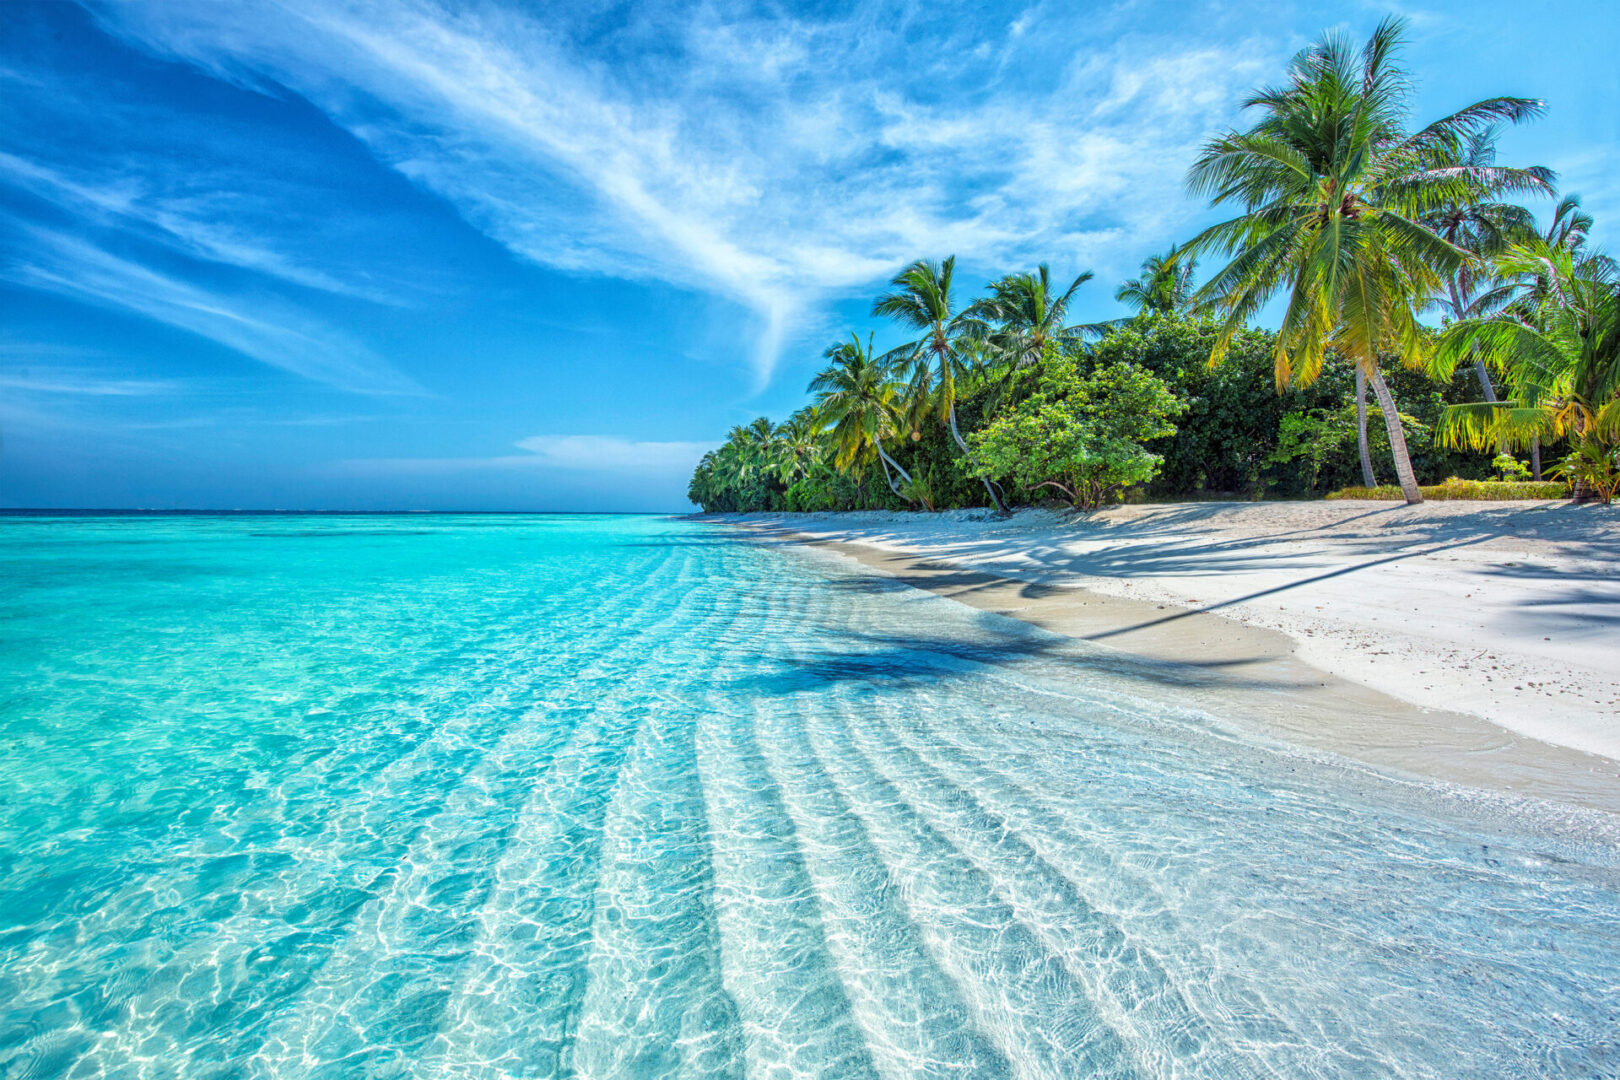 A beach with palm trees and clear water